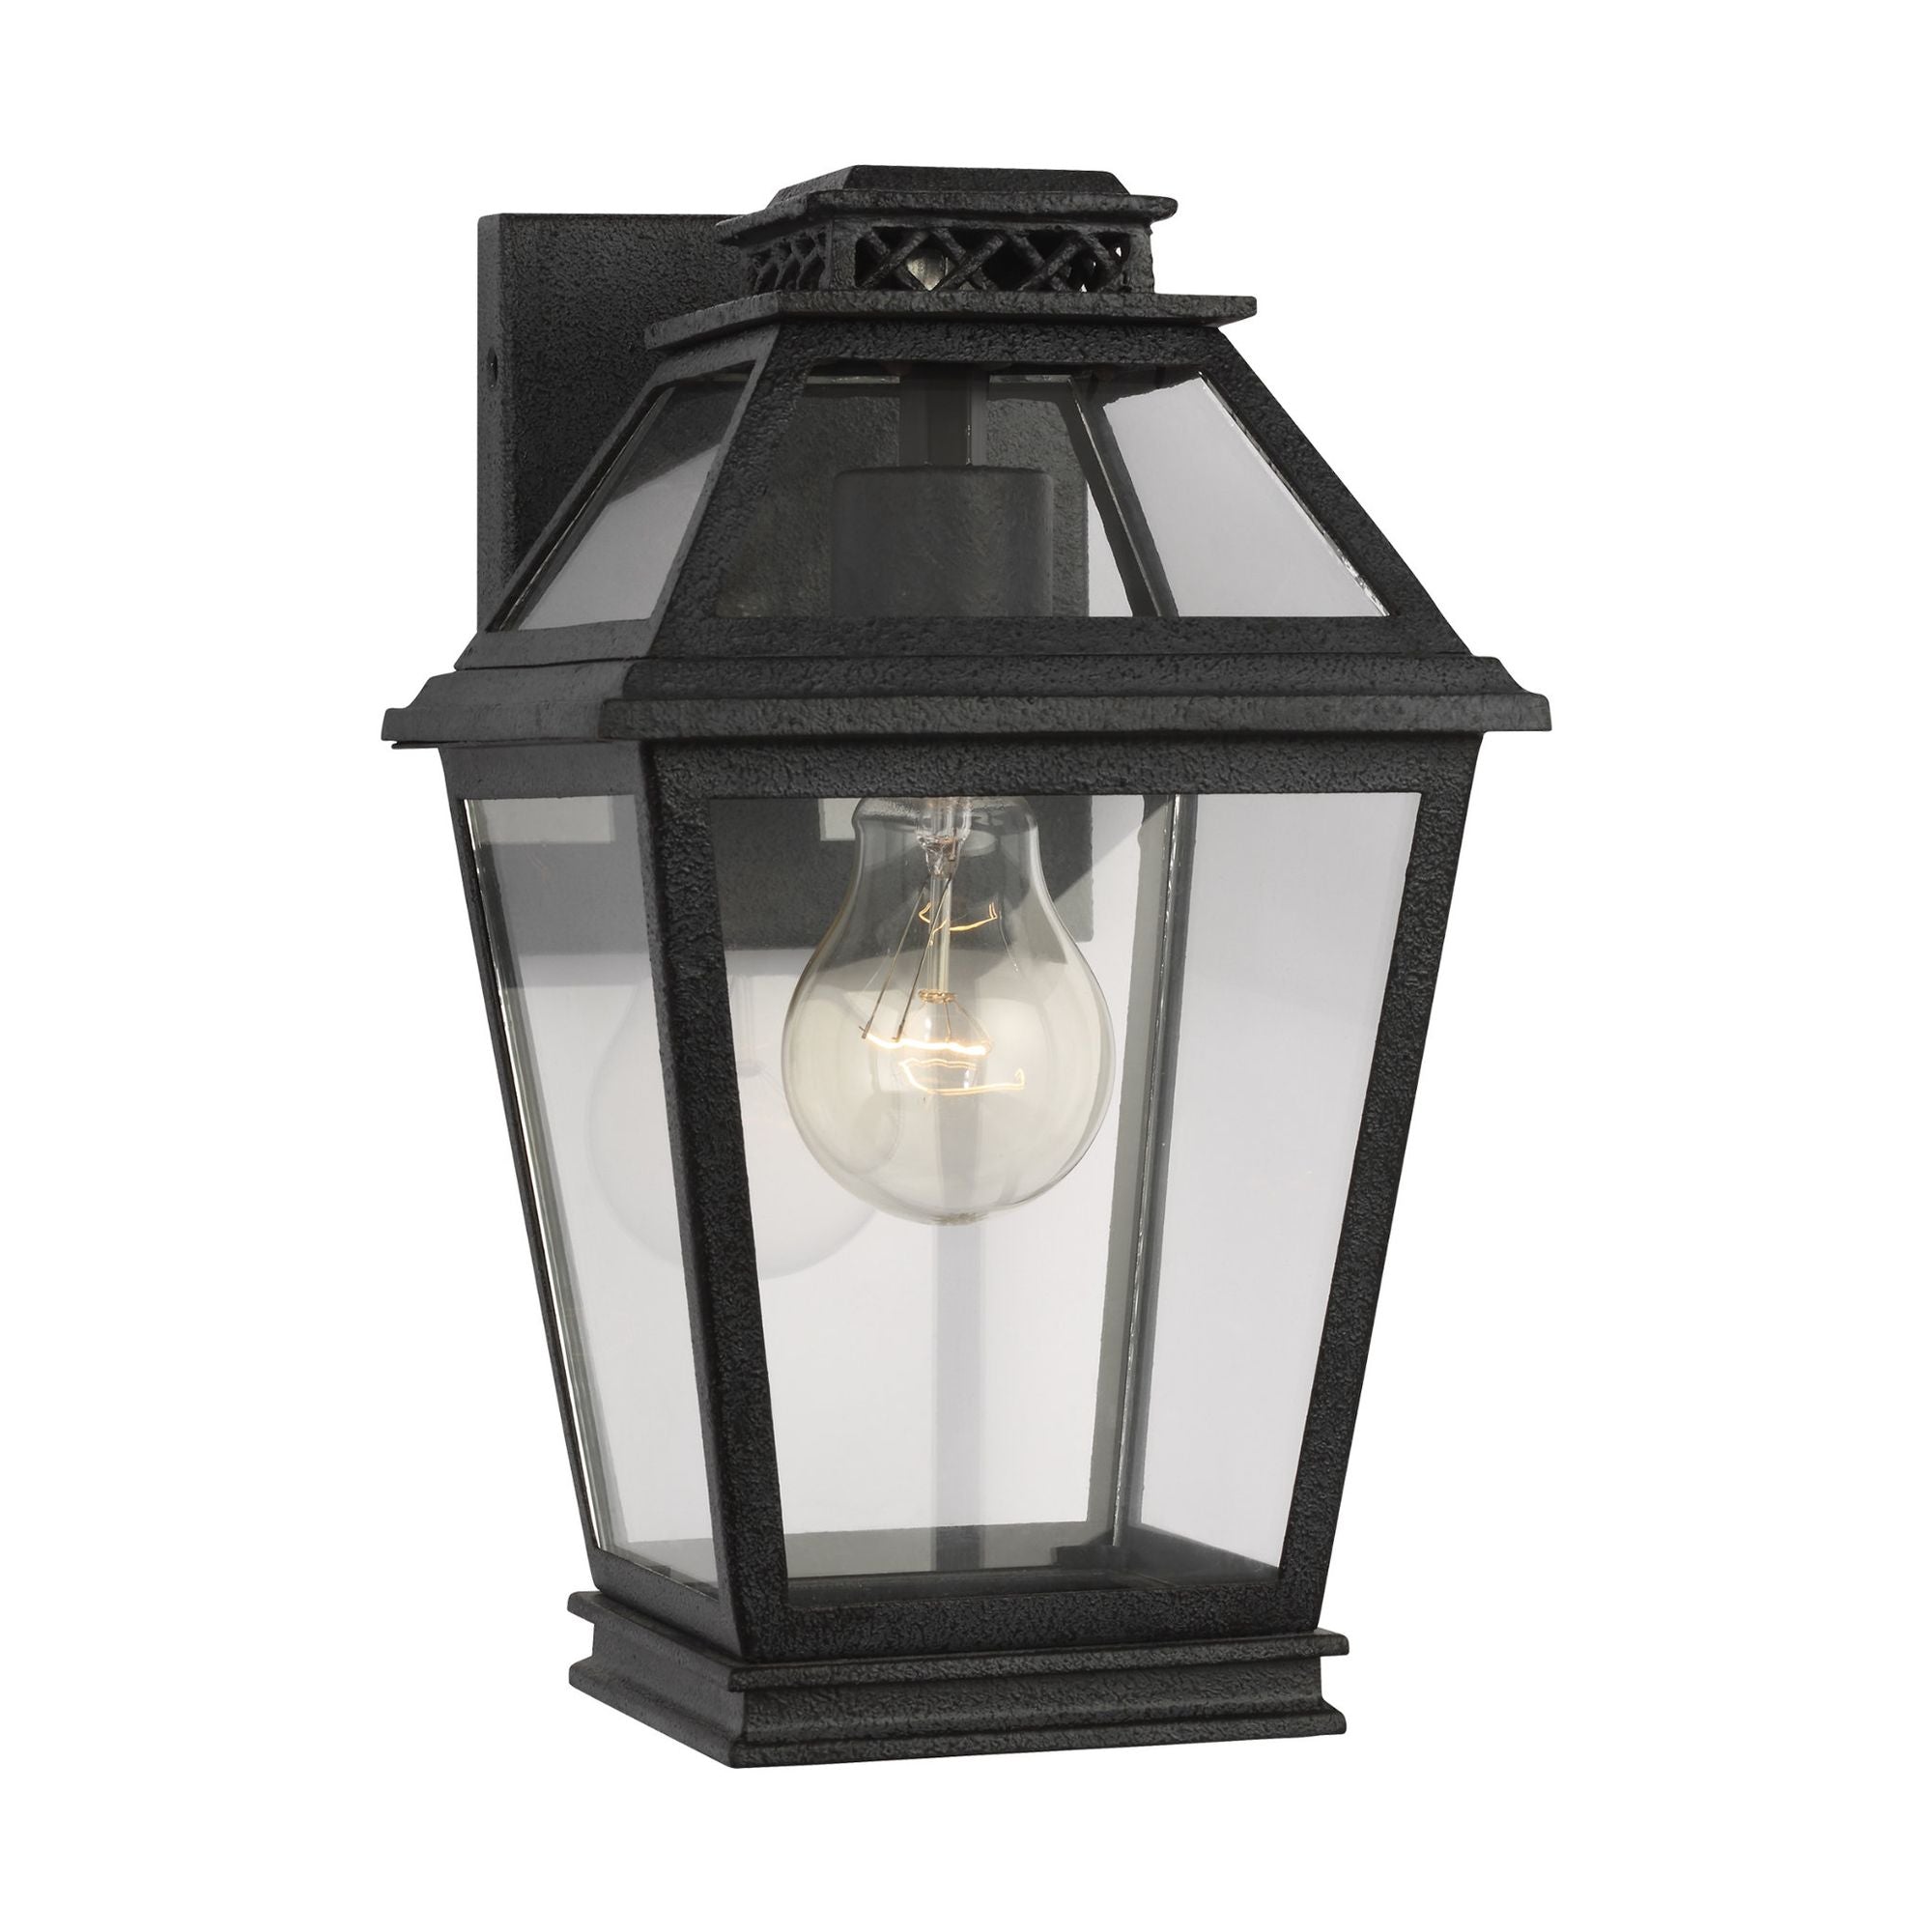 Chapman & Myers Falmouth Extra Small Outdoor Wall Lantern in Dark Weathered Zinc